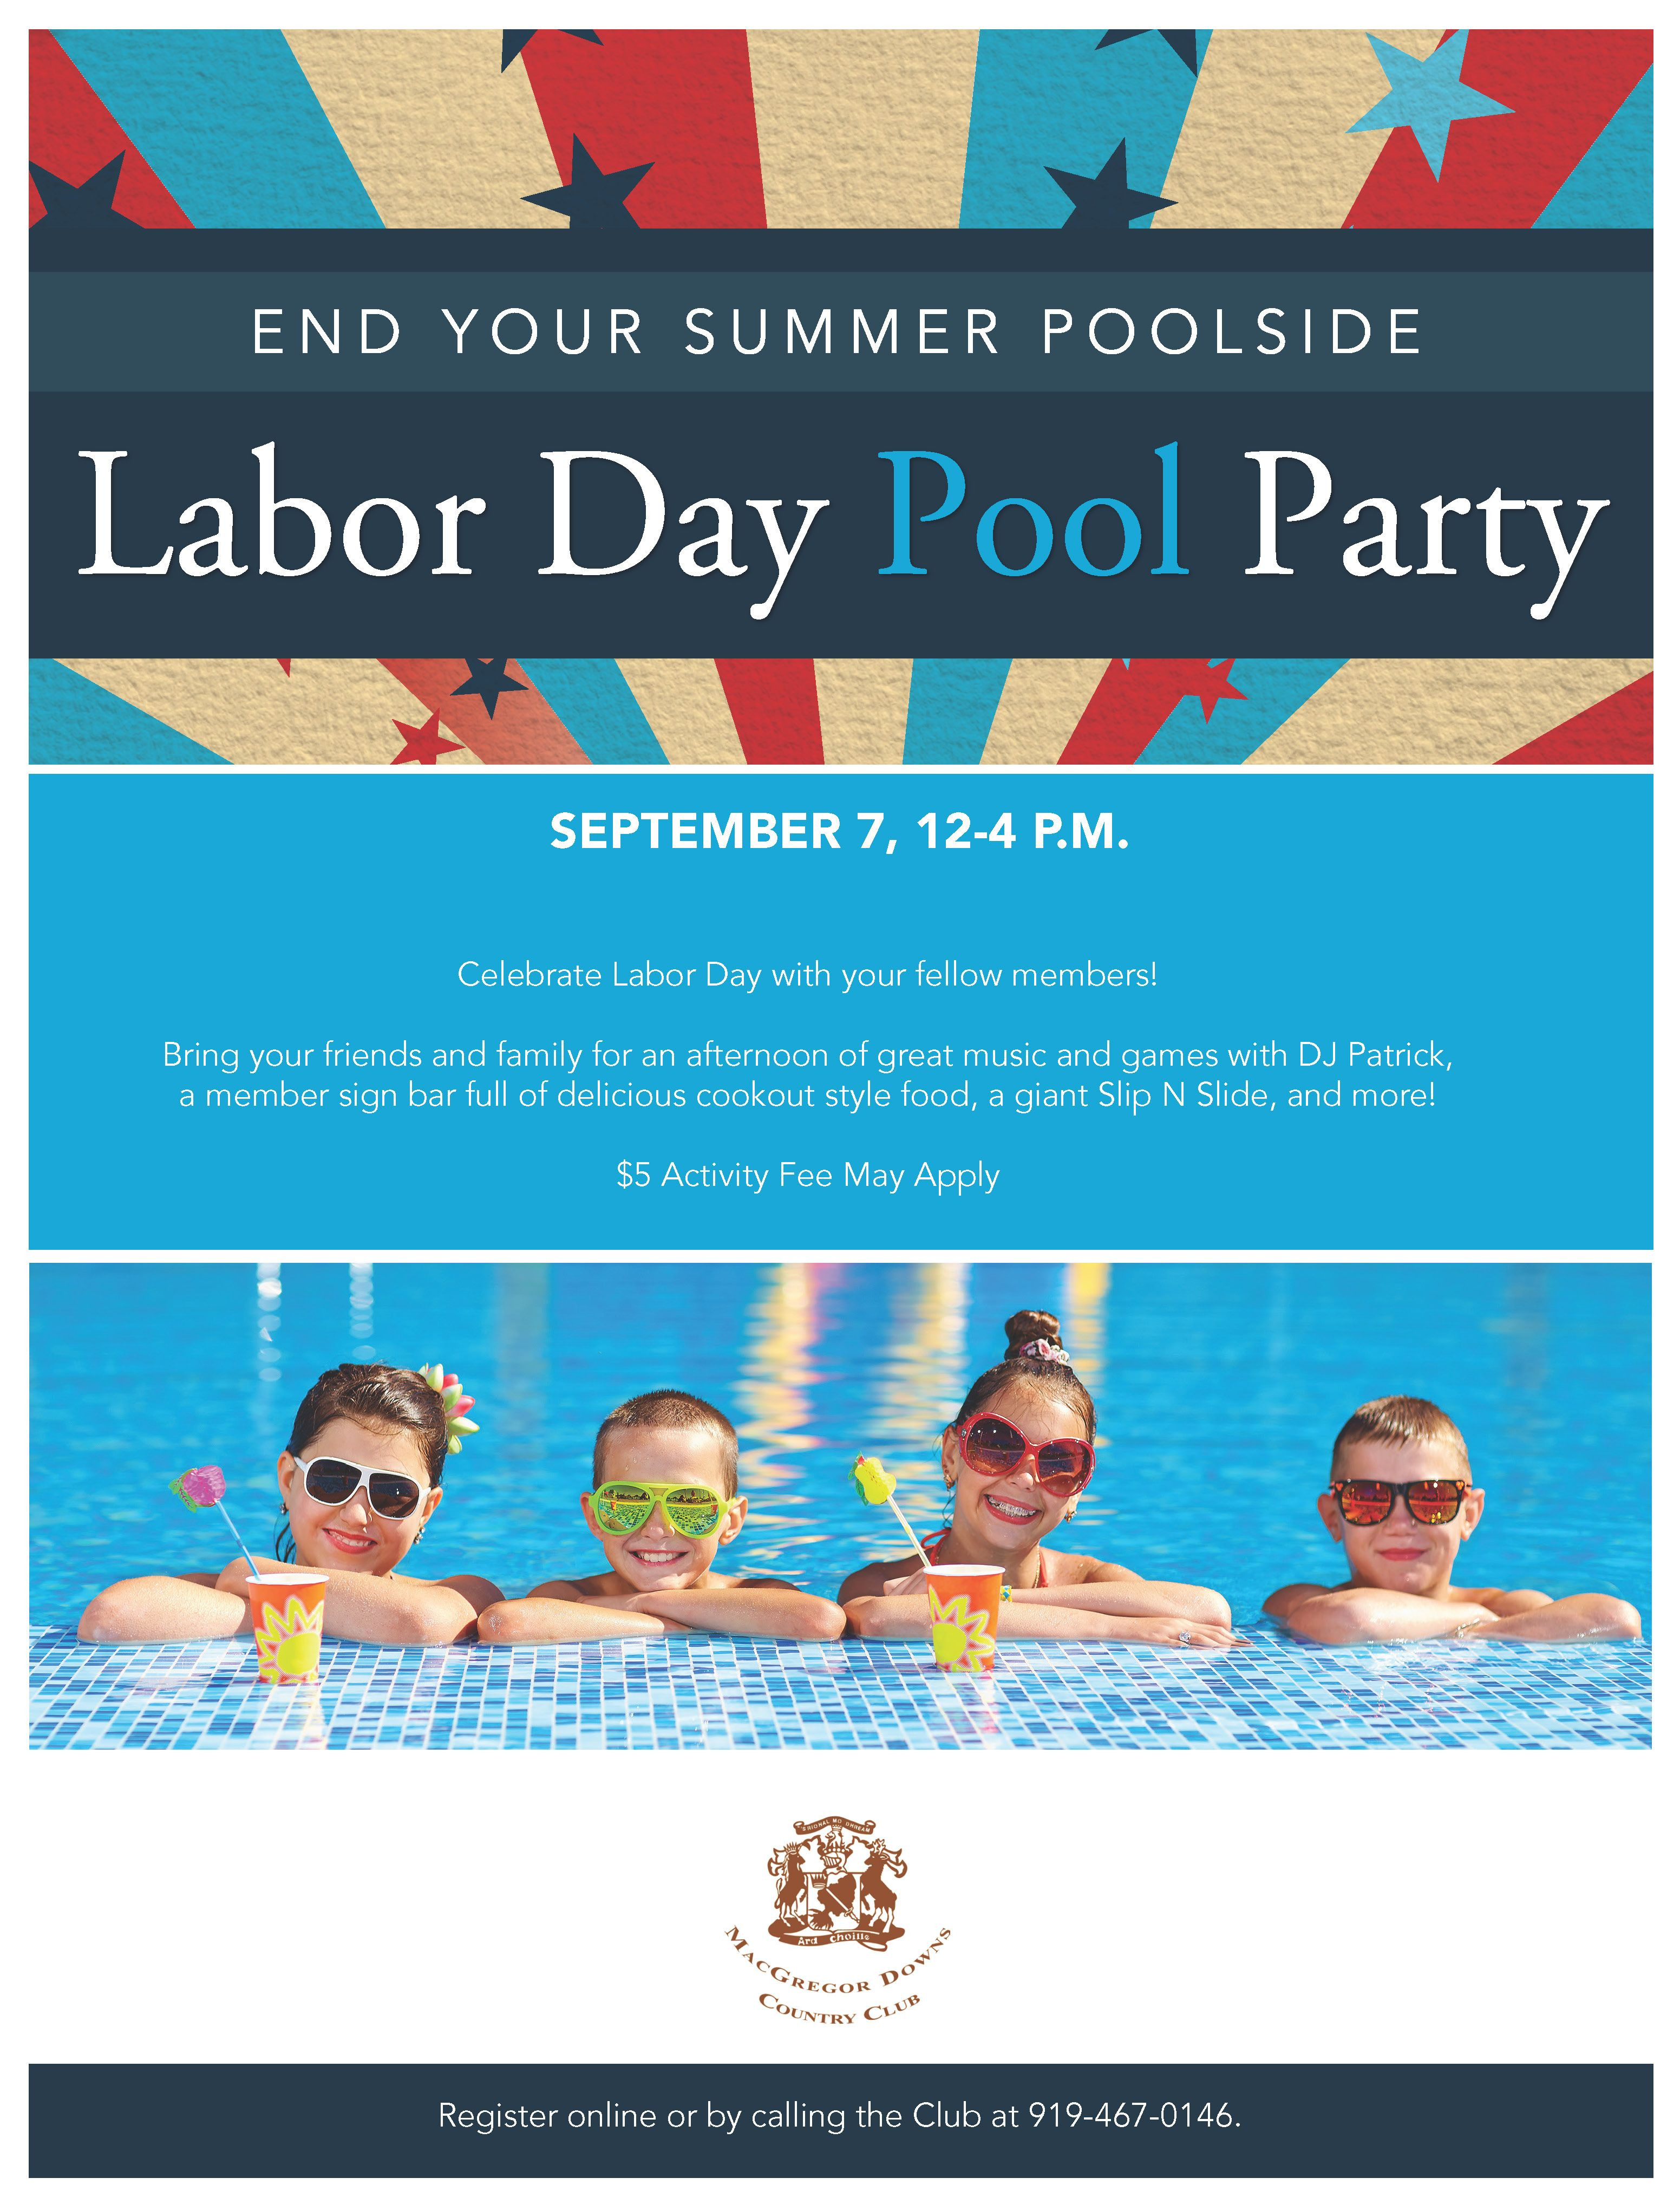 Labor Day Pool Party Ideas
 Labor Day Pool Party at MacGregor Downs Country Club